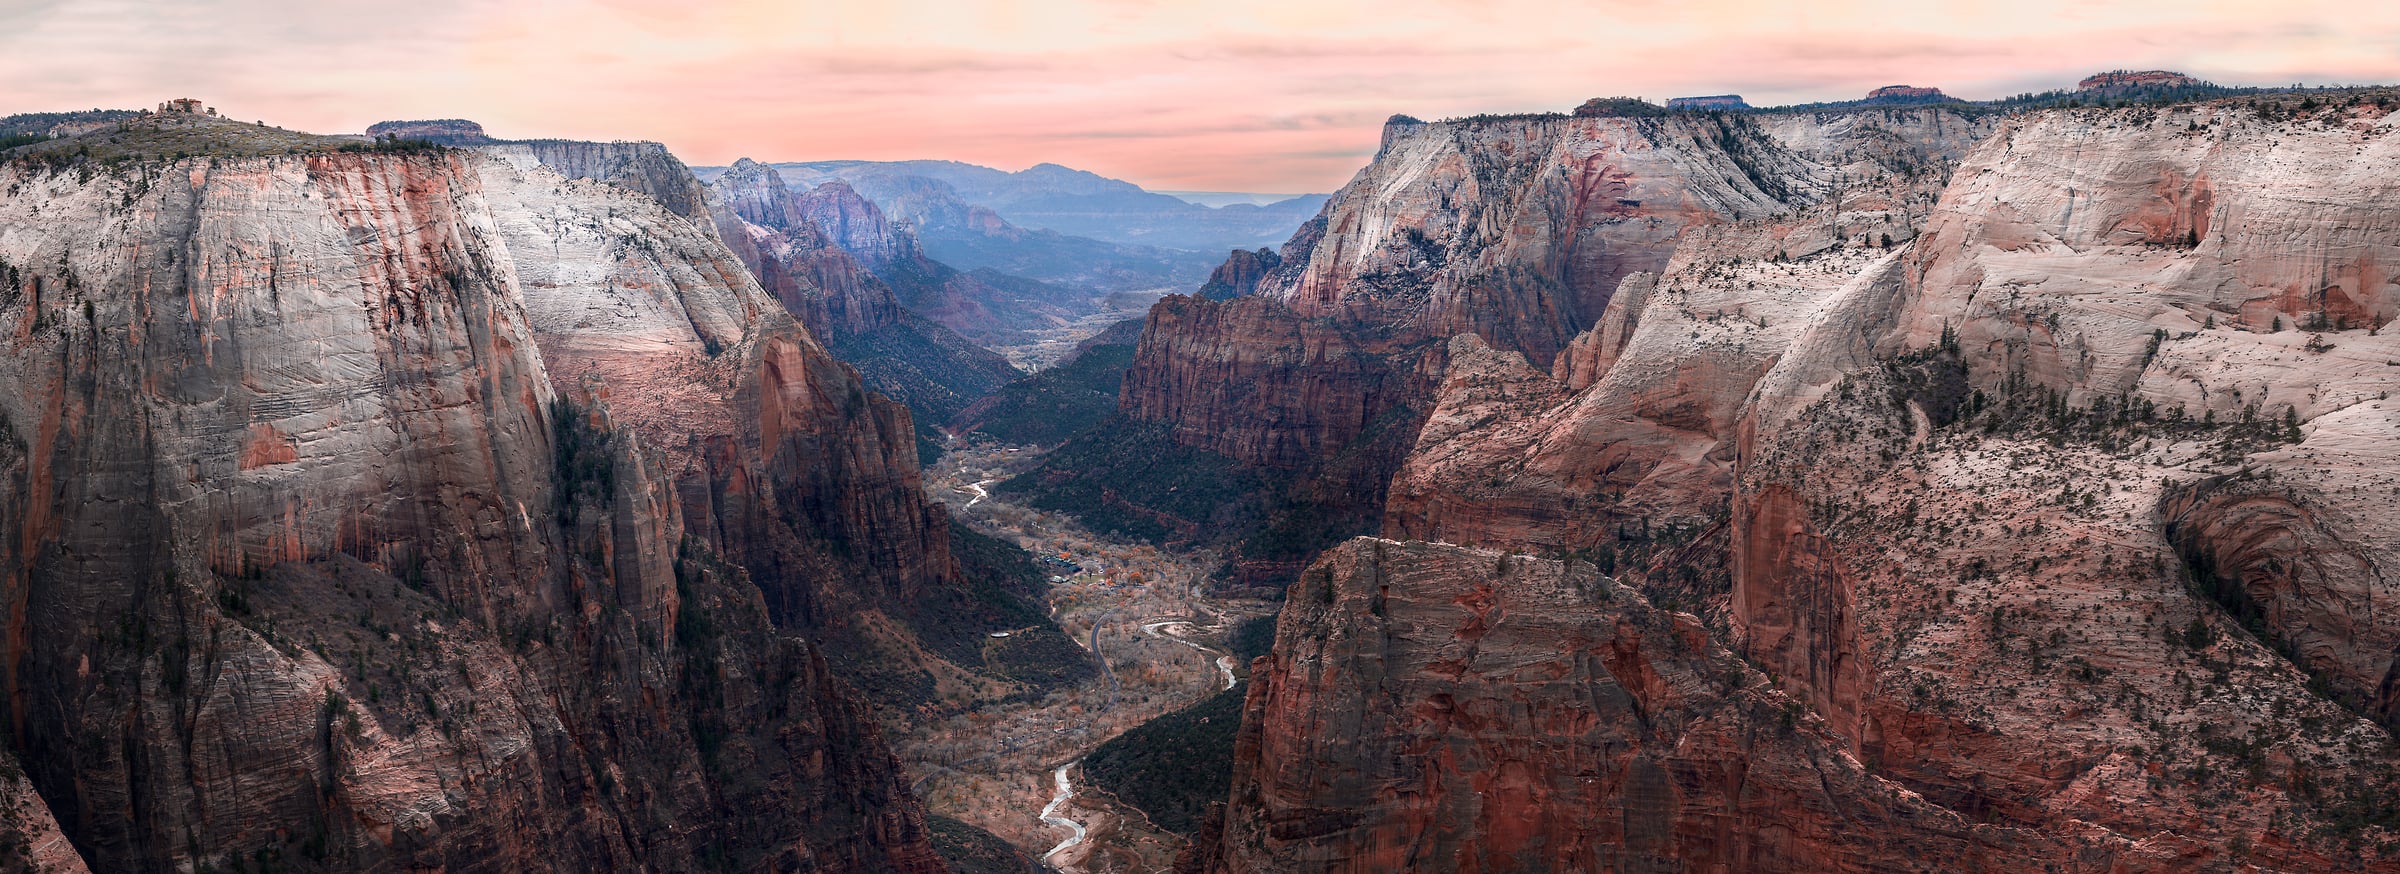 2,276 megapixels! A very high resolution, large-format VAST photo print of the Angels Landing rock formation in Zion National Park at sunset; photograph created by David David in Angels Landing, Zion National Park, Utah.